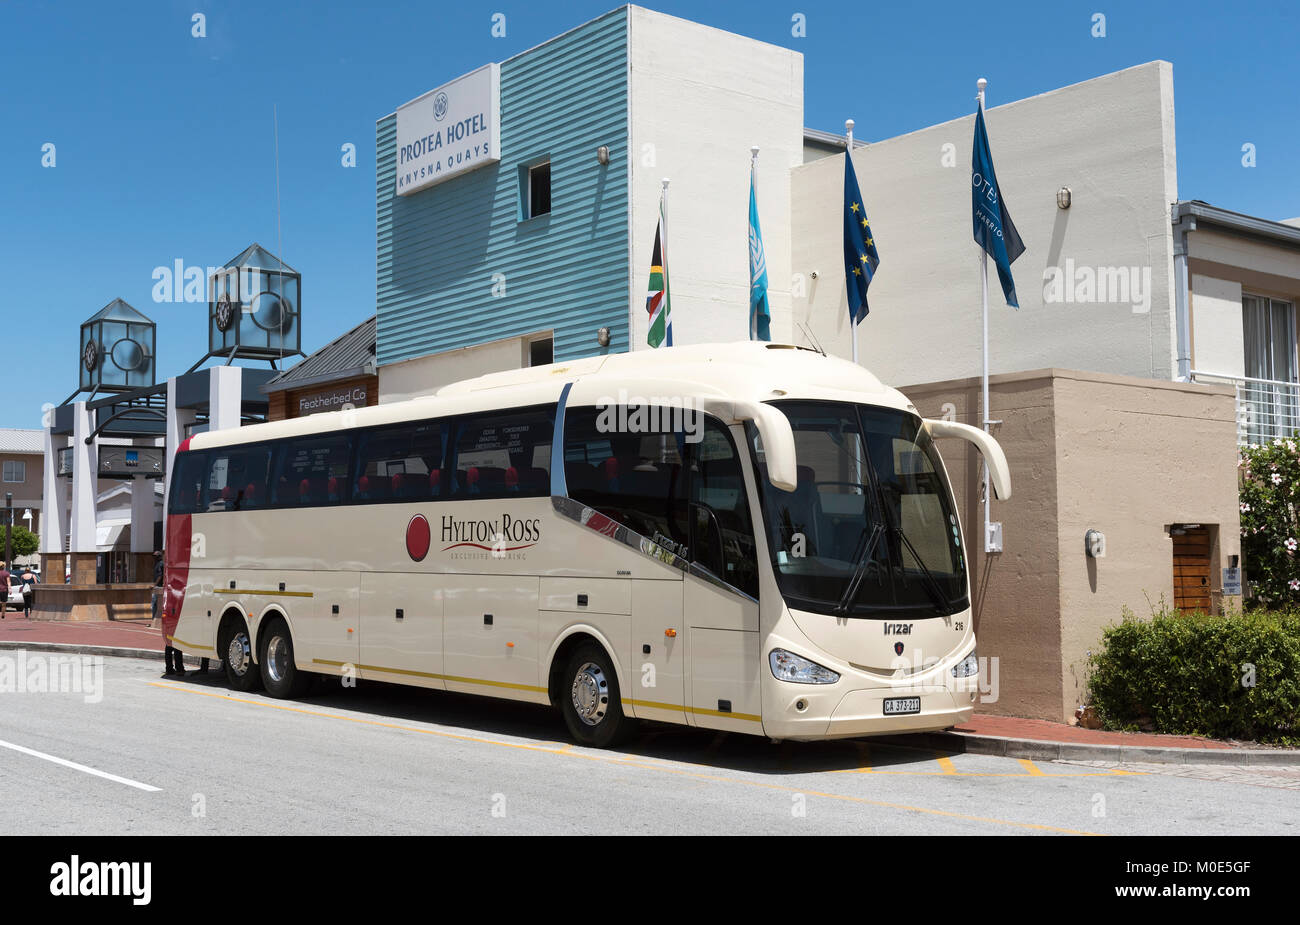 Knysna Quays Western Cape South Africa. December 2017. A tourbus parked at a holiday hotel in Knysna. Stock Photo